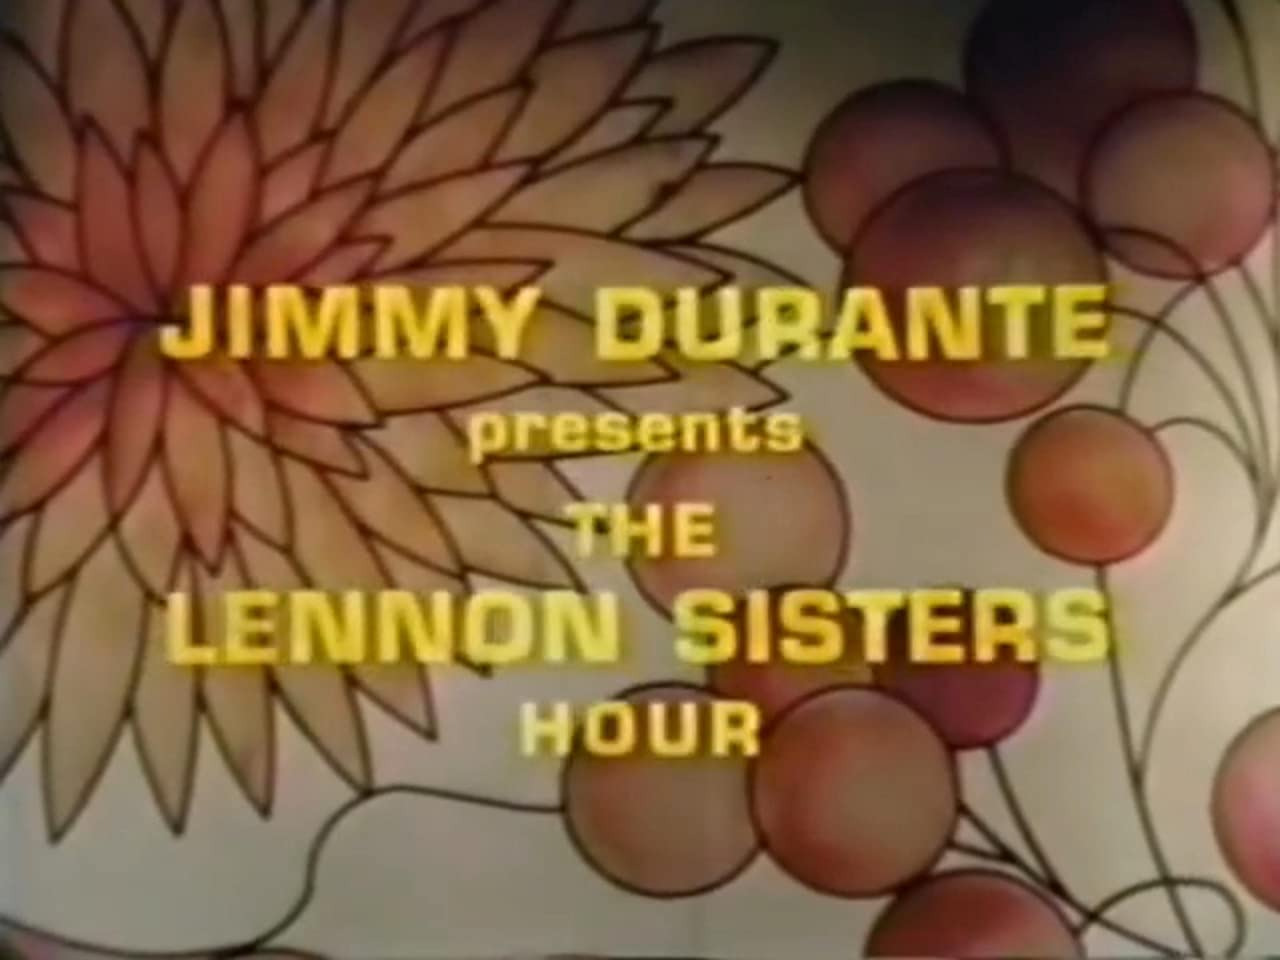 Show Jimmy Durante Presents the Lennon Sisters